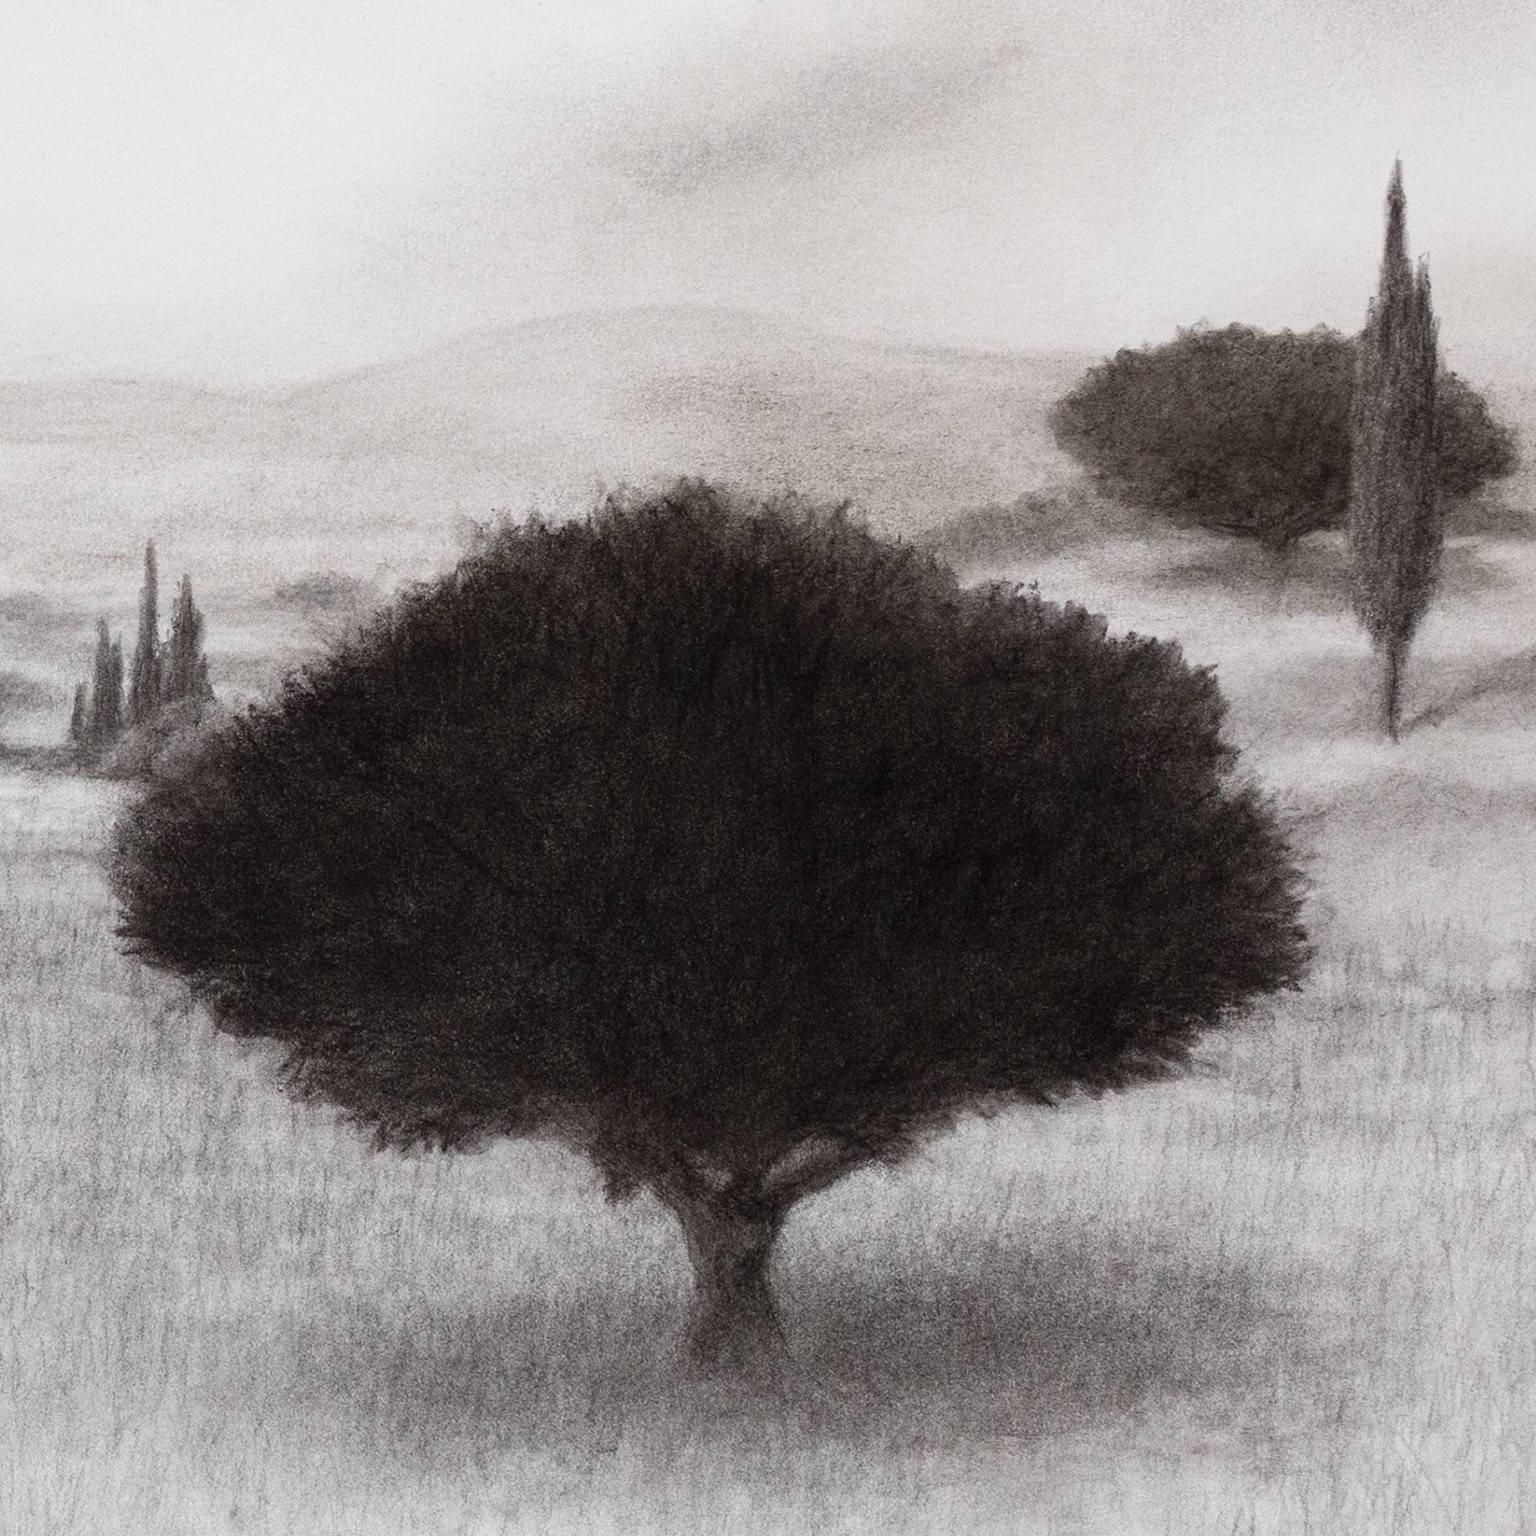 Olive Grove with Hills in the Distance - Charcoal Drawing, Greek Island, Country - Art by George Tzannes